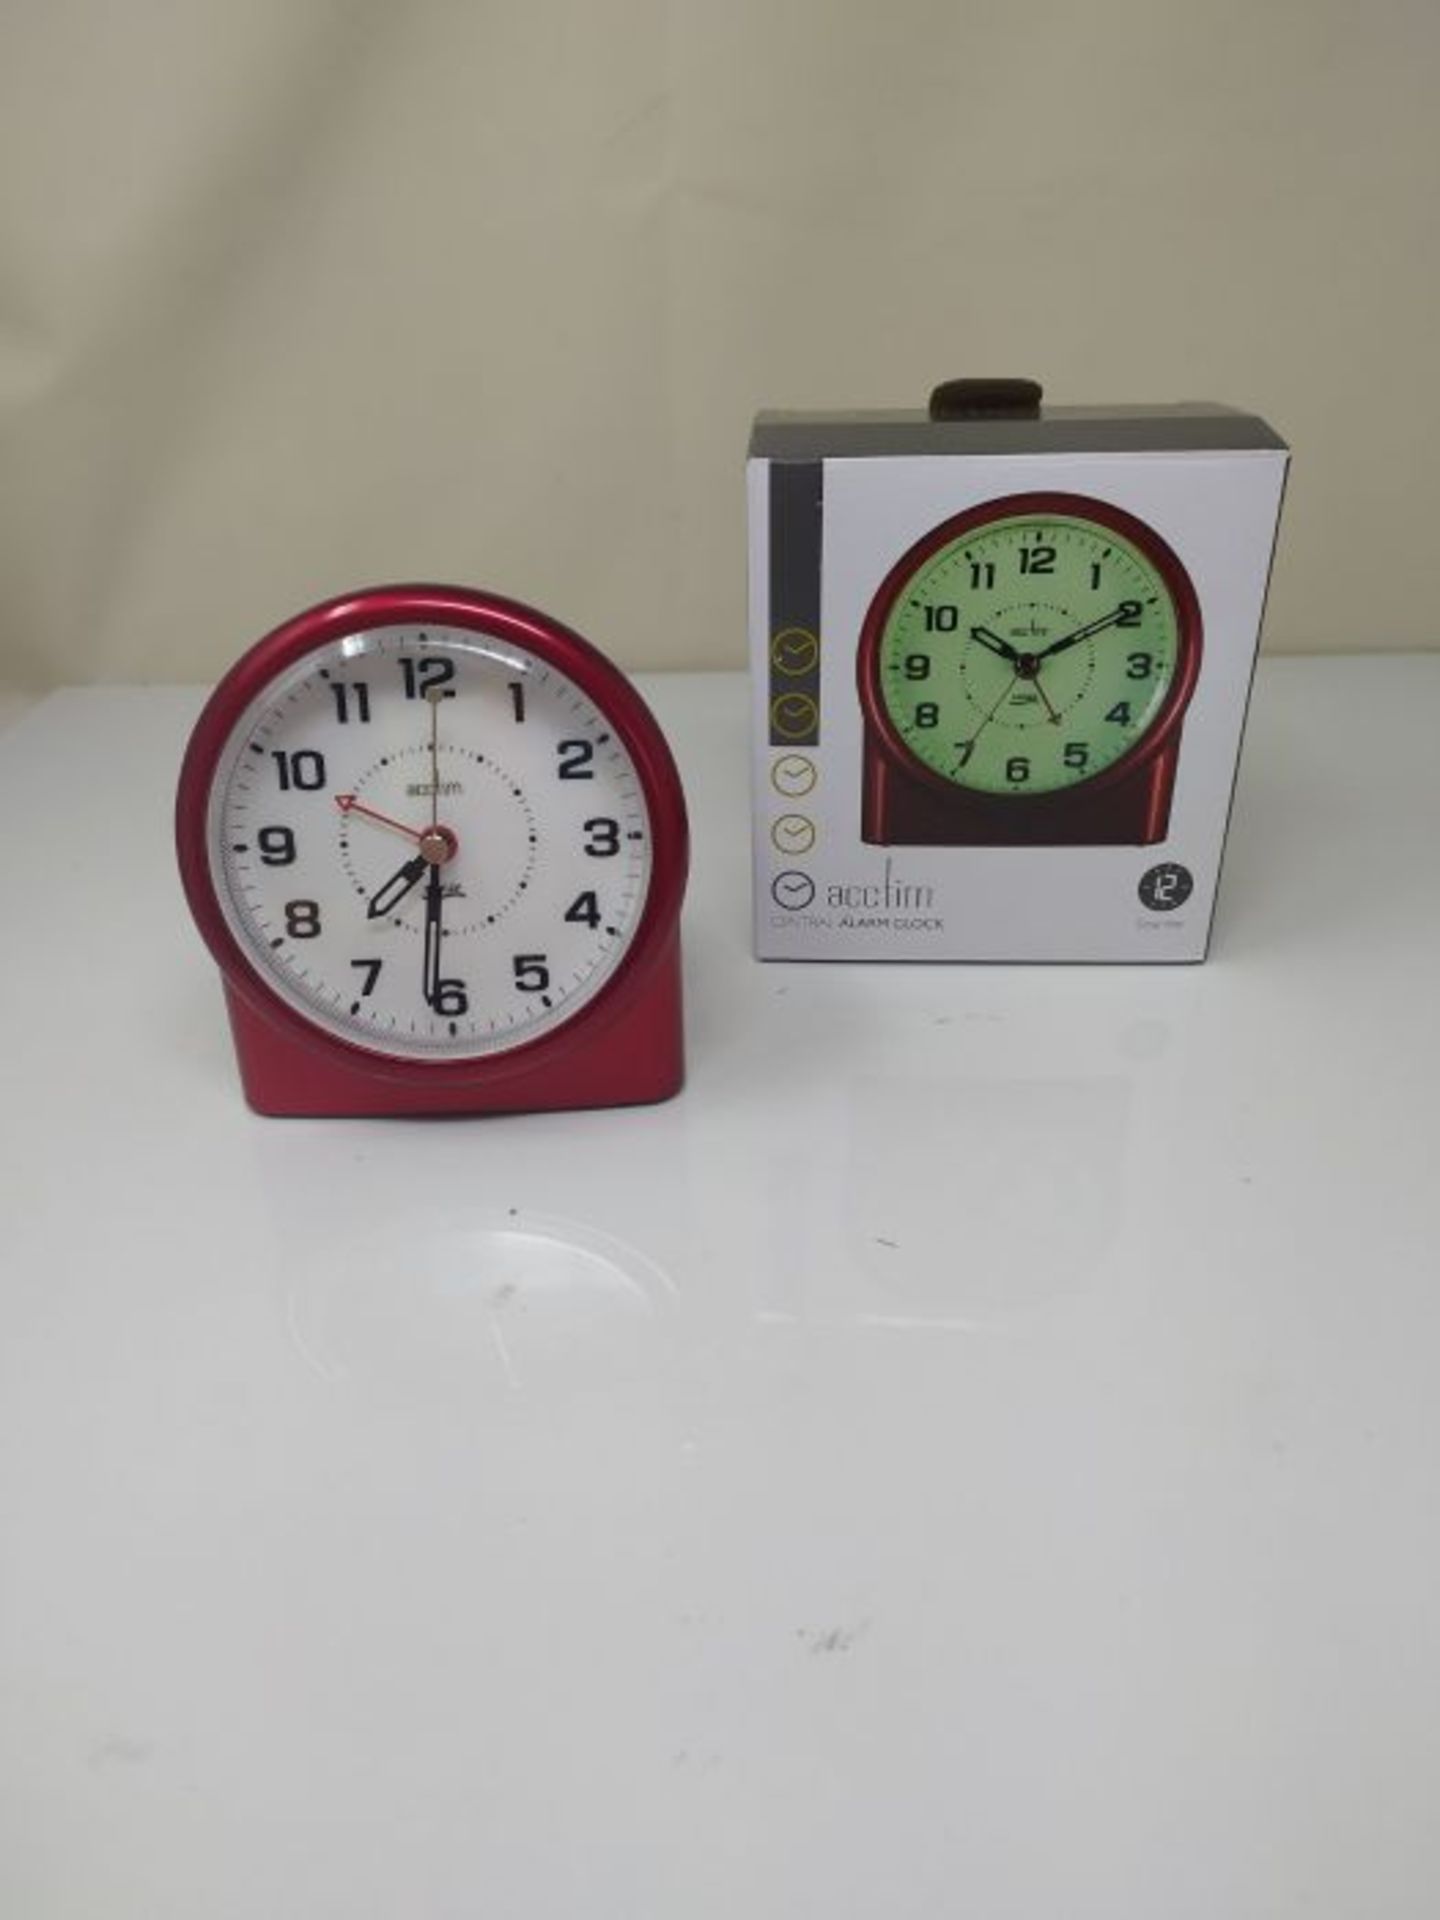 Acctim 14284 Central Alarm Clock, Red - Image 2 of 2